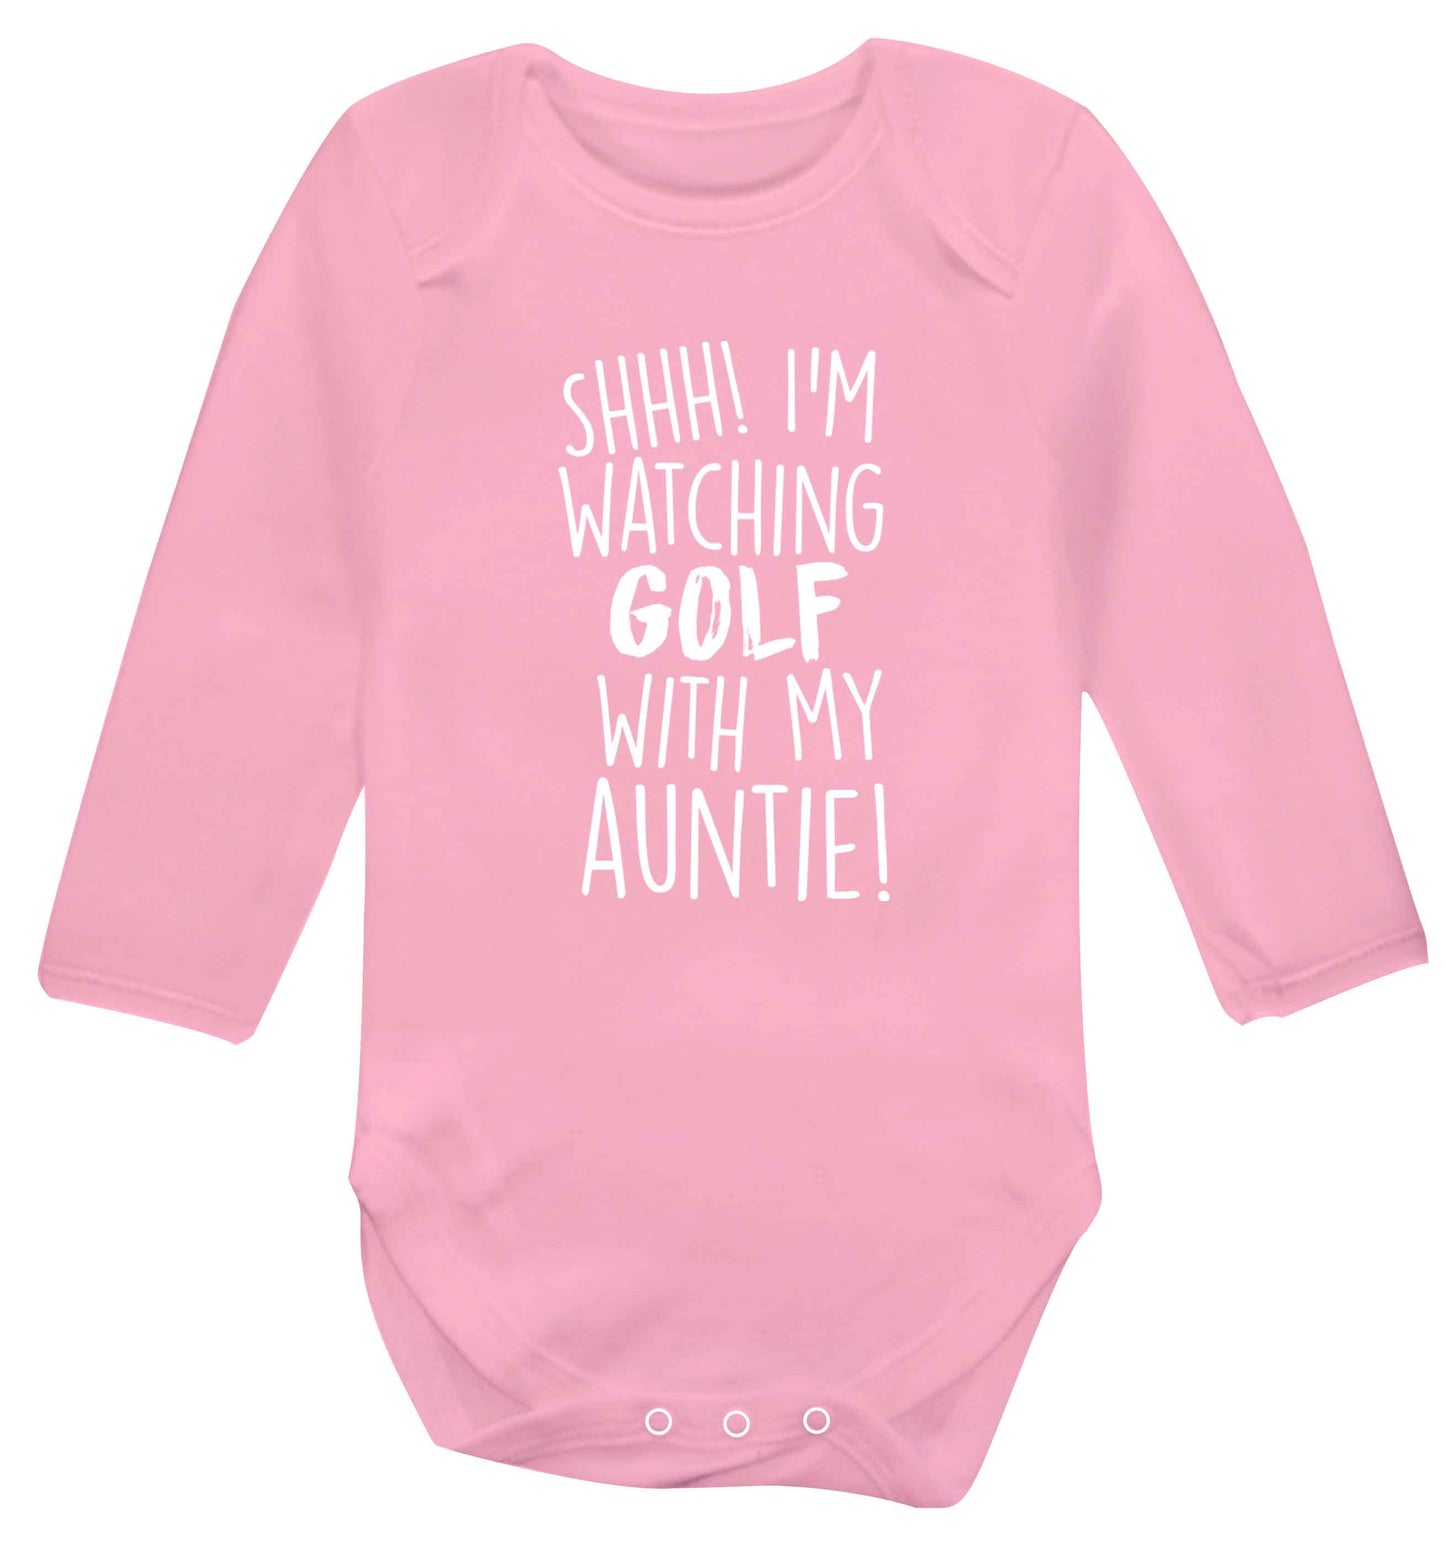 Shh I'm watching golf with my auntie Baby Vest long sleeved pale pink 6-12 months